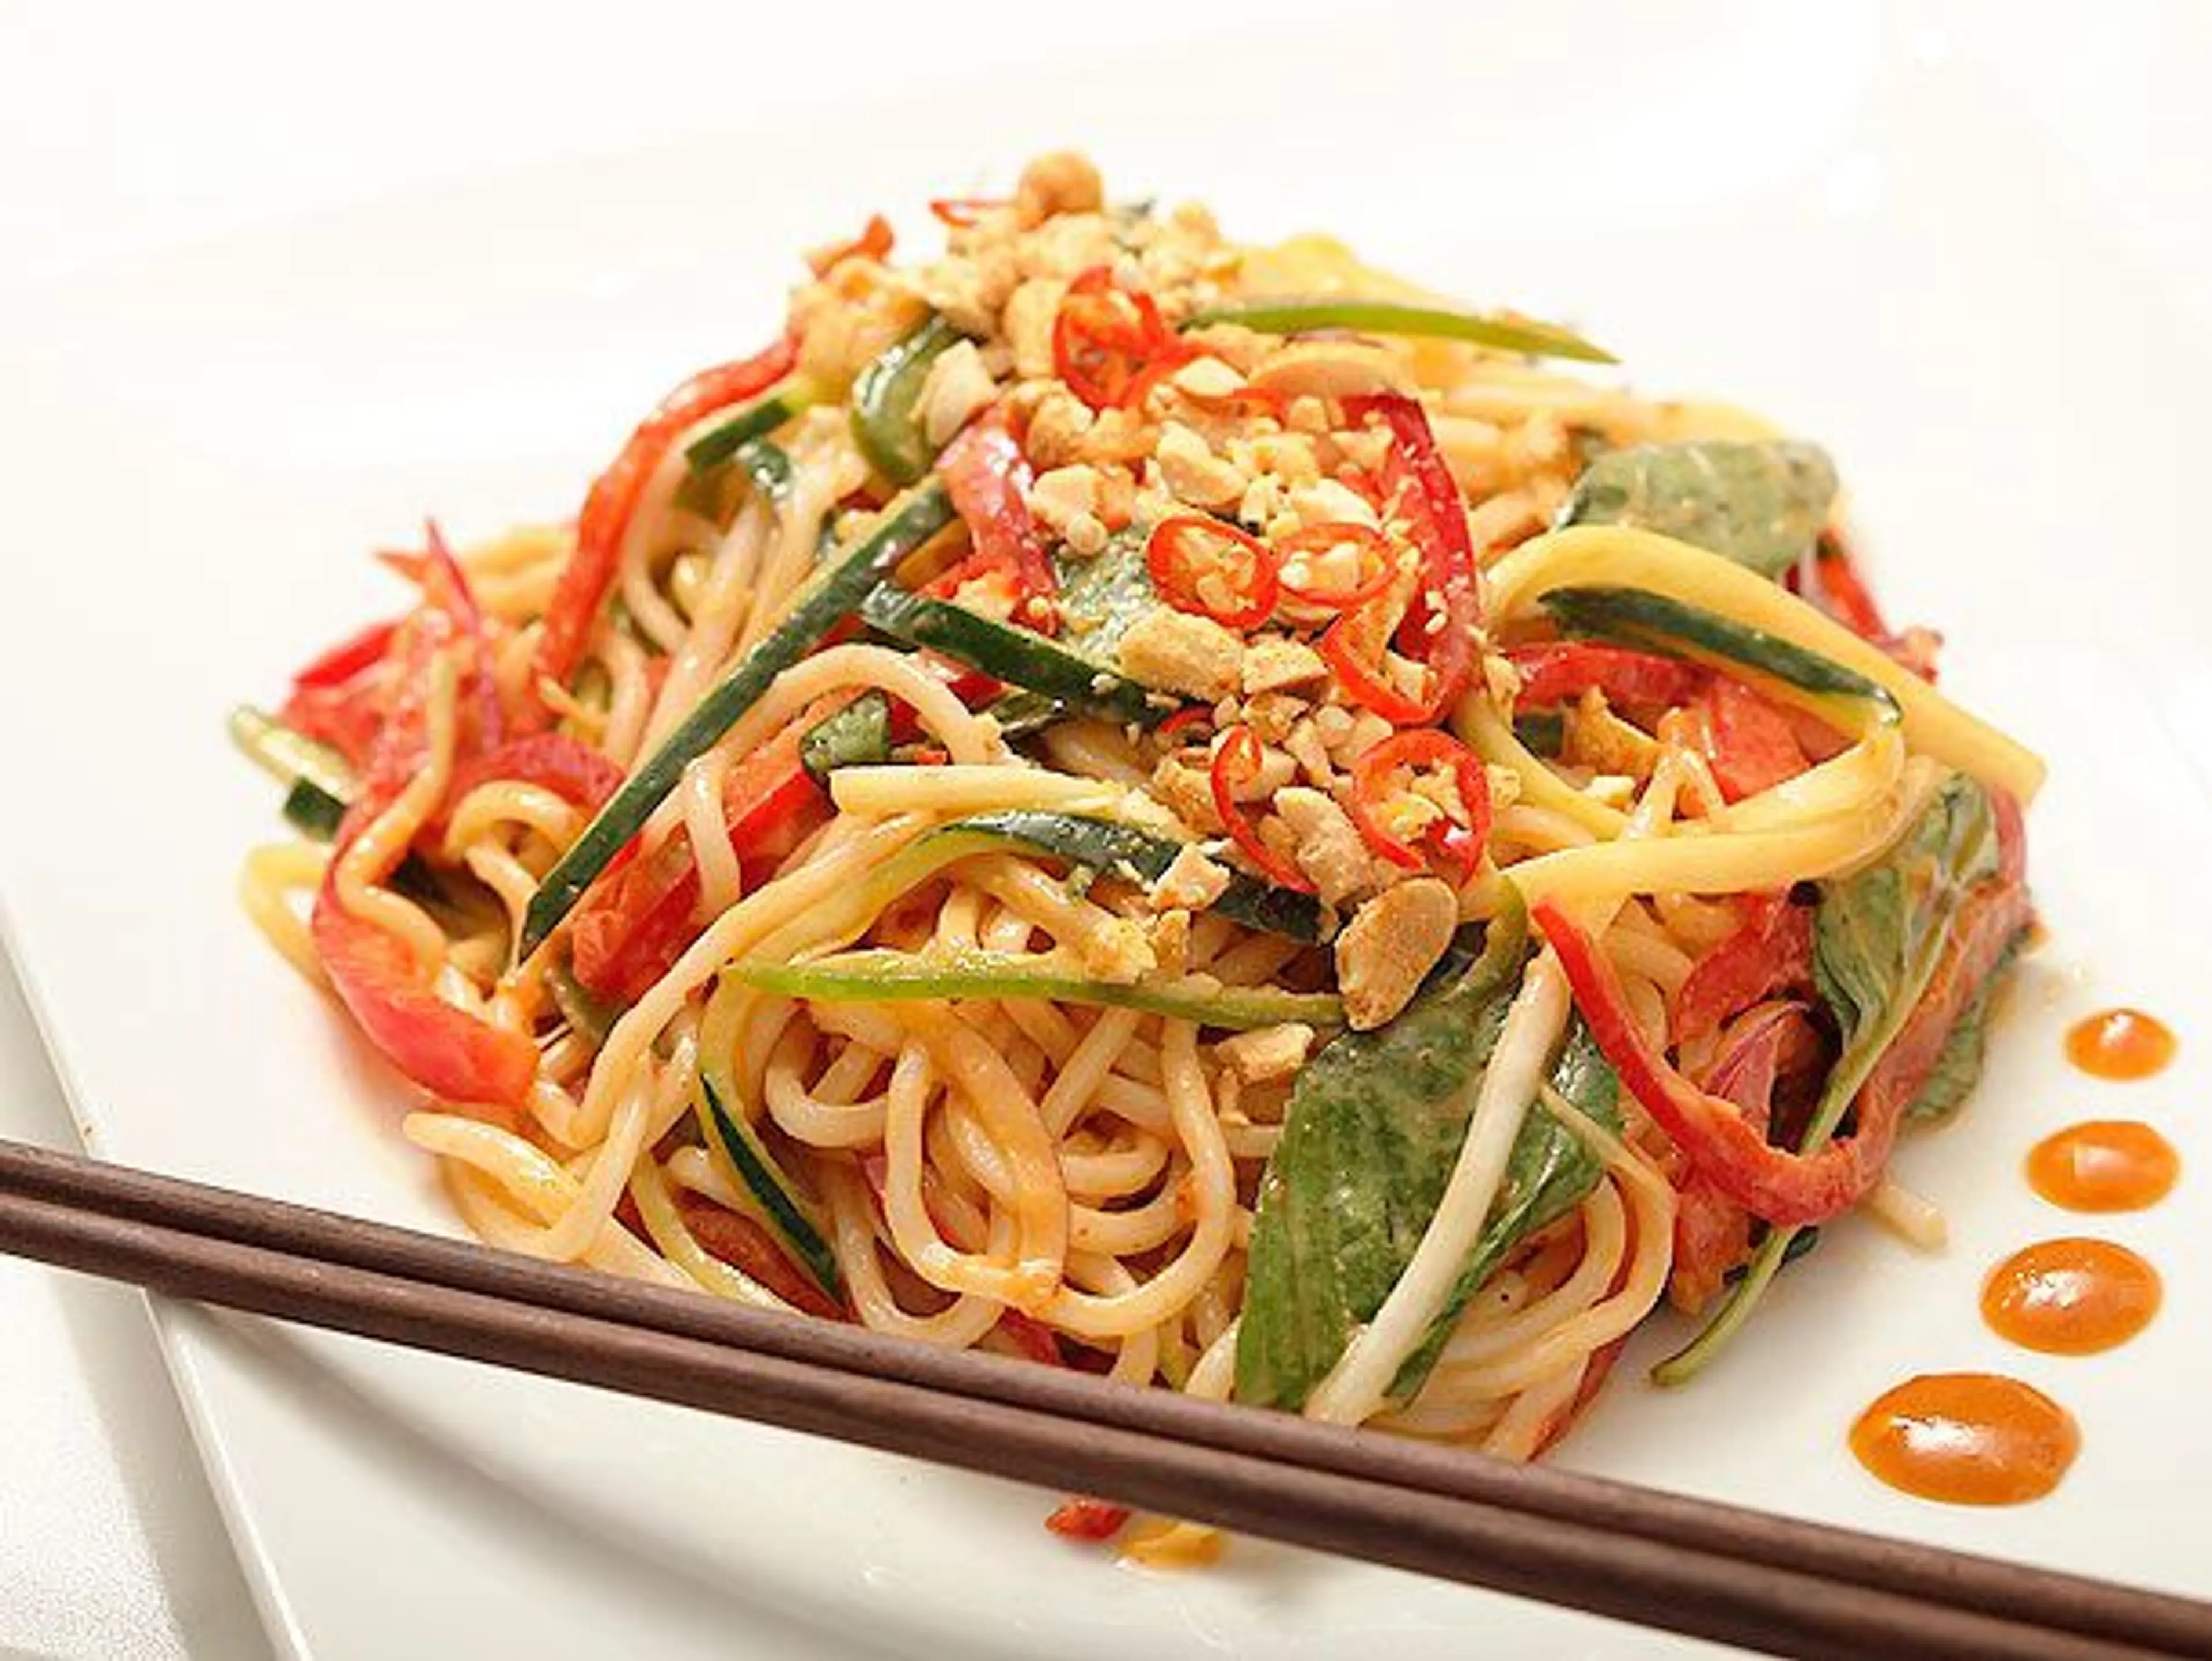 Spicy Peanut Noodle Salad With Cucumbers, Red Peppers, and B